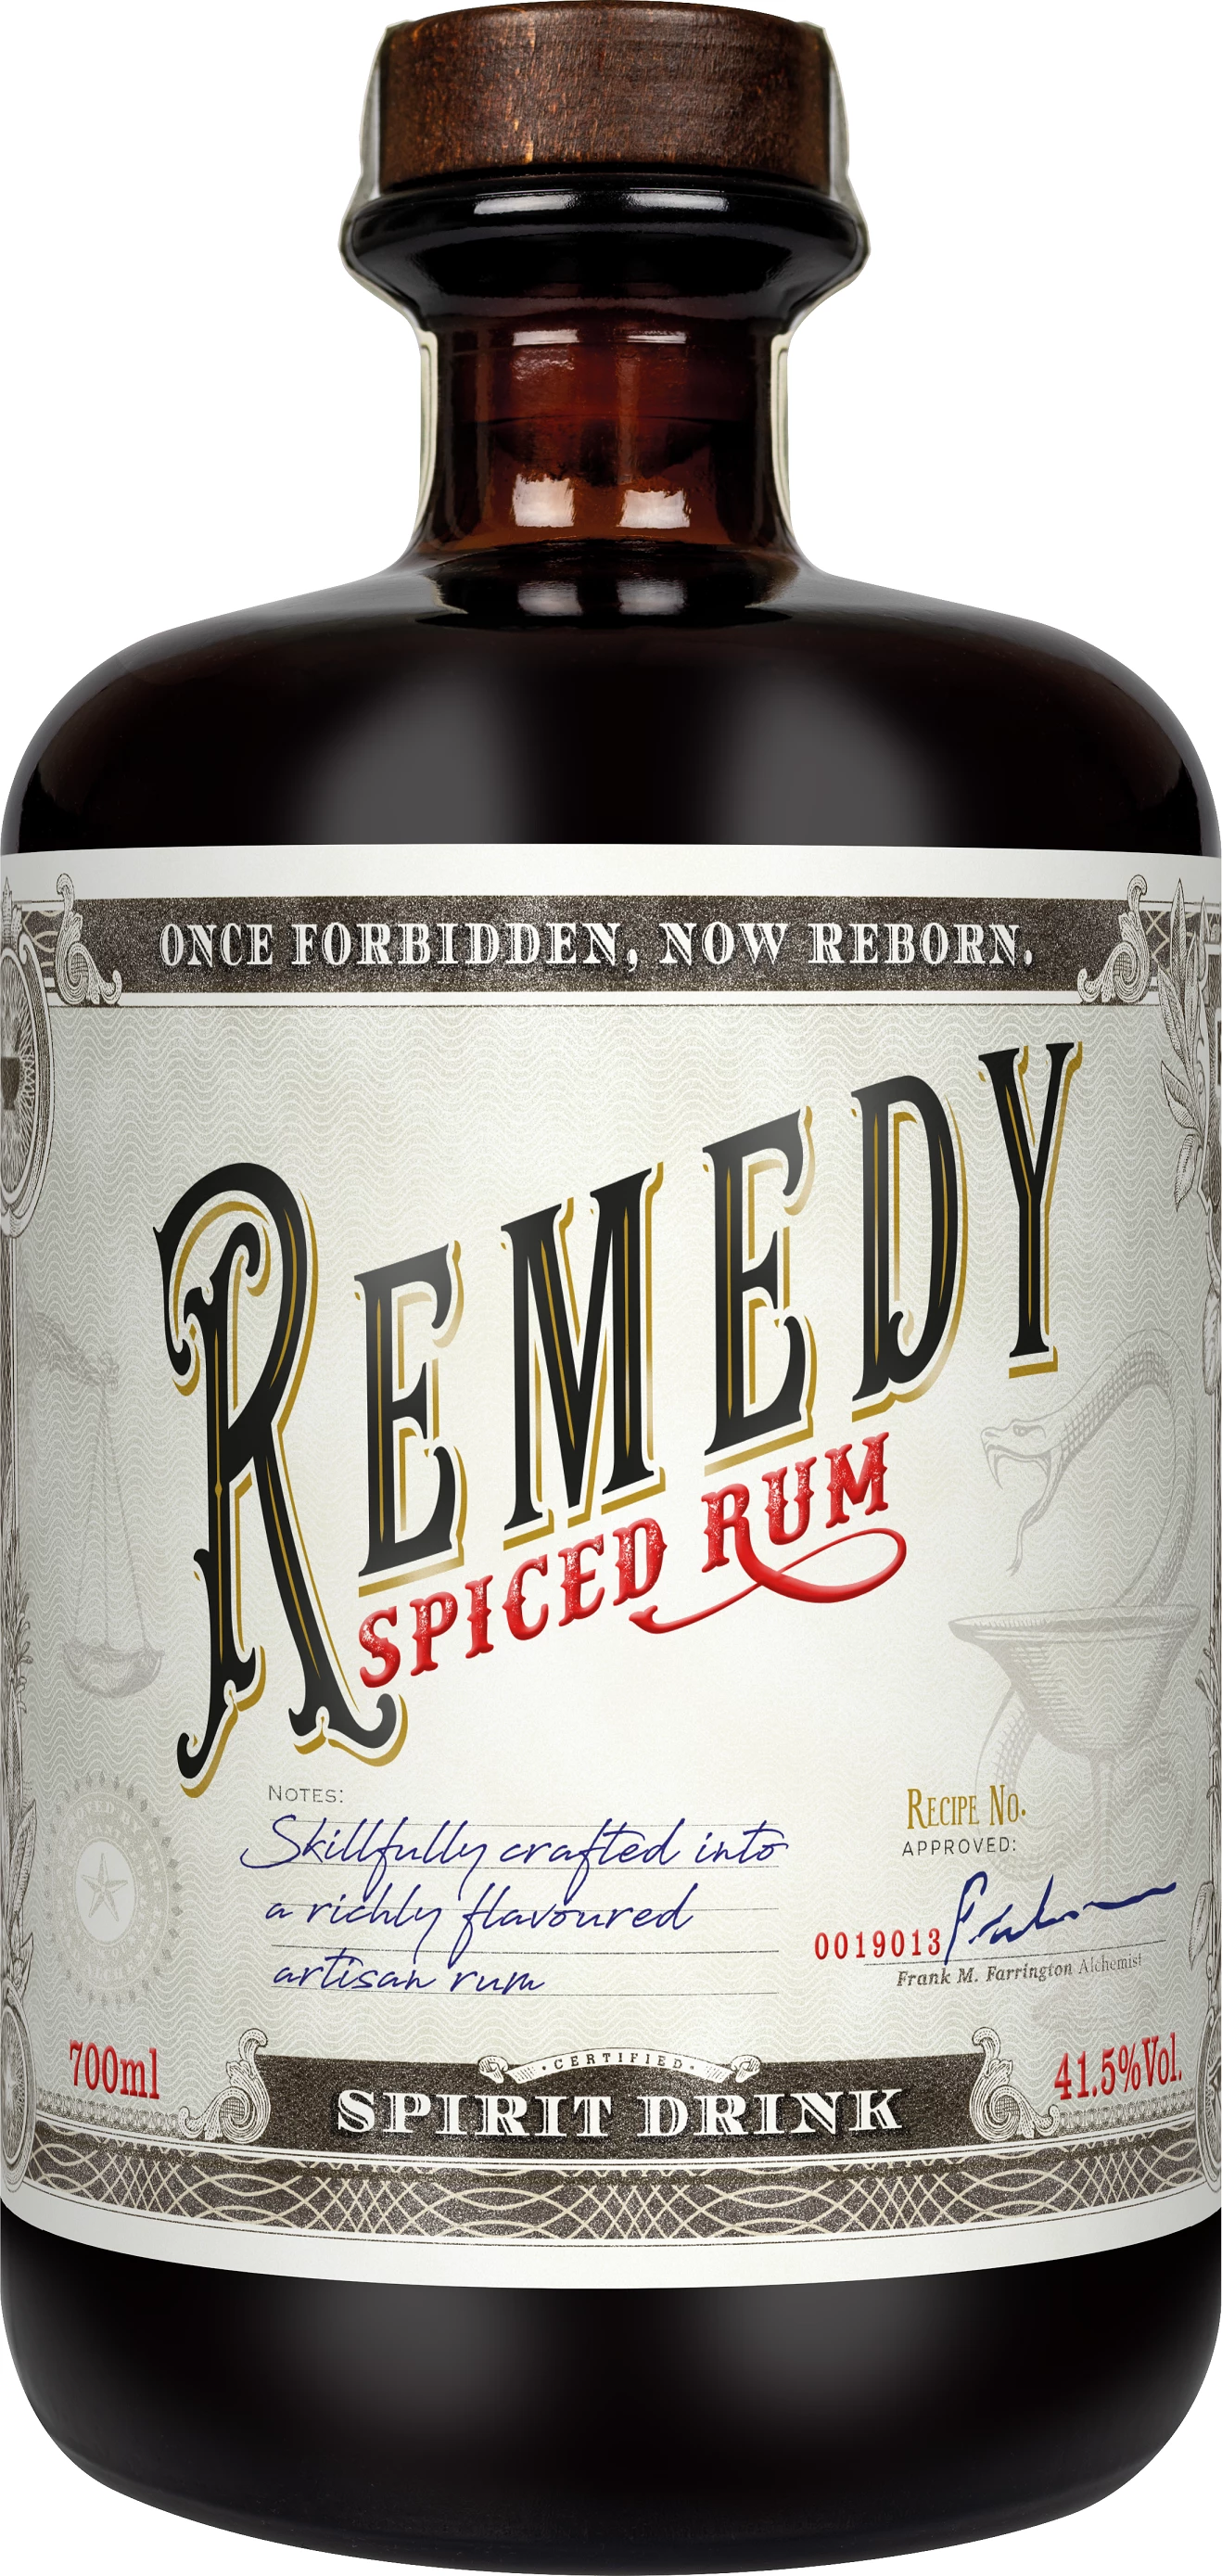 Remedy Spiced (Rum Basis) 41,5% 0,7l